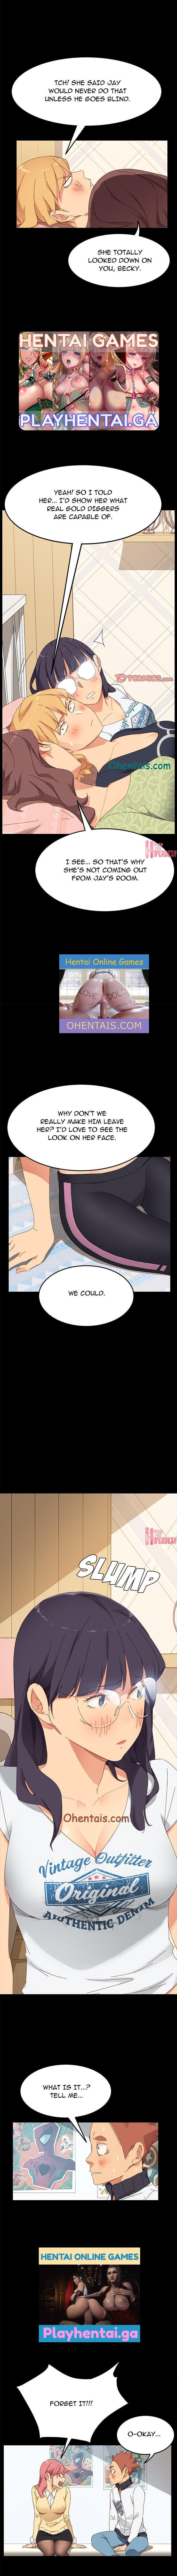 The Perfect Roommates Ch. 8 8